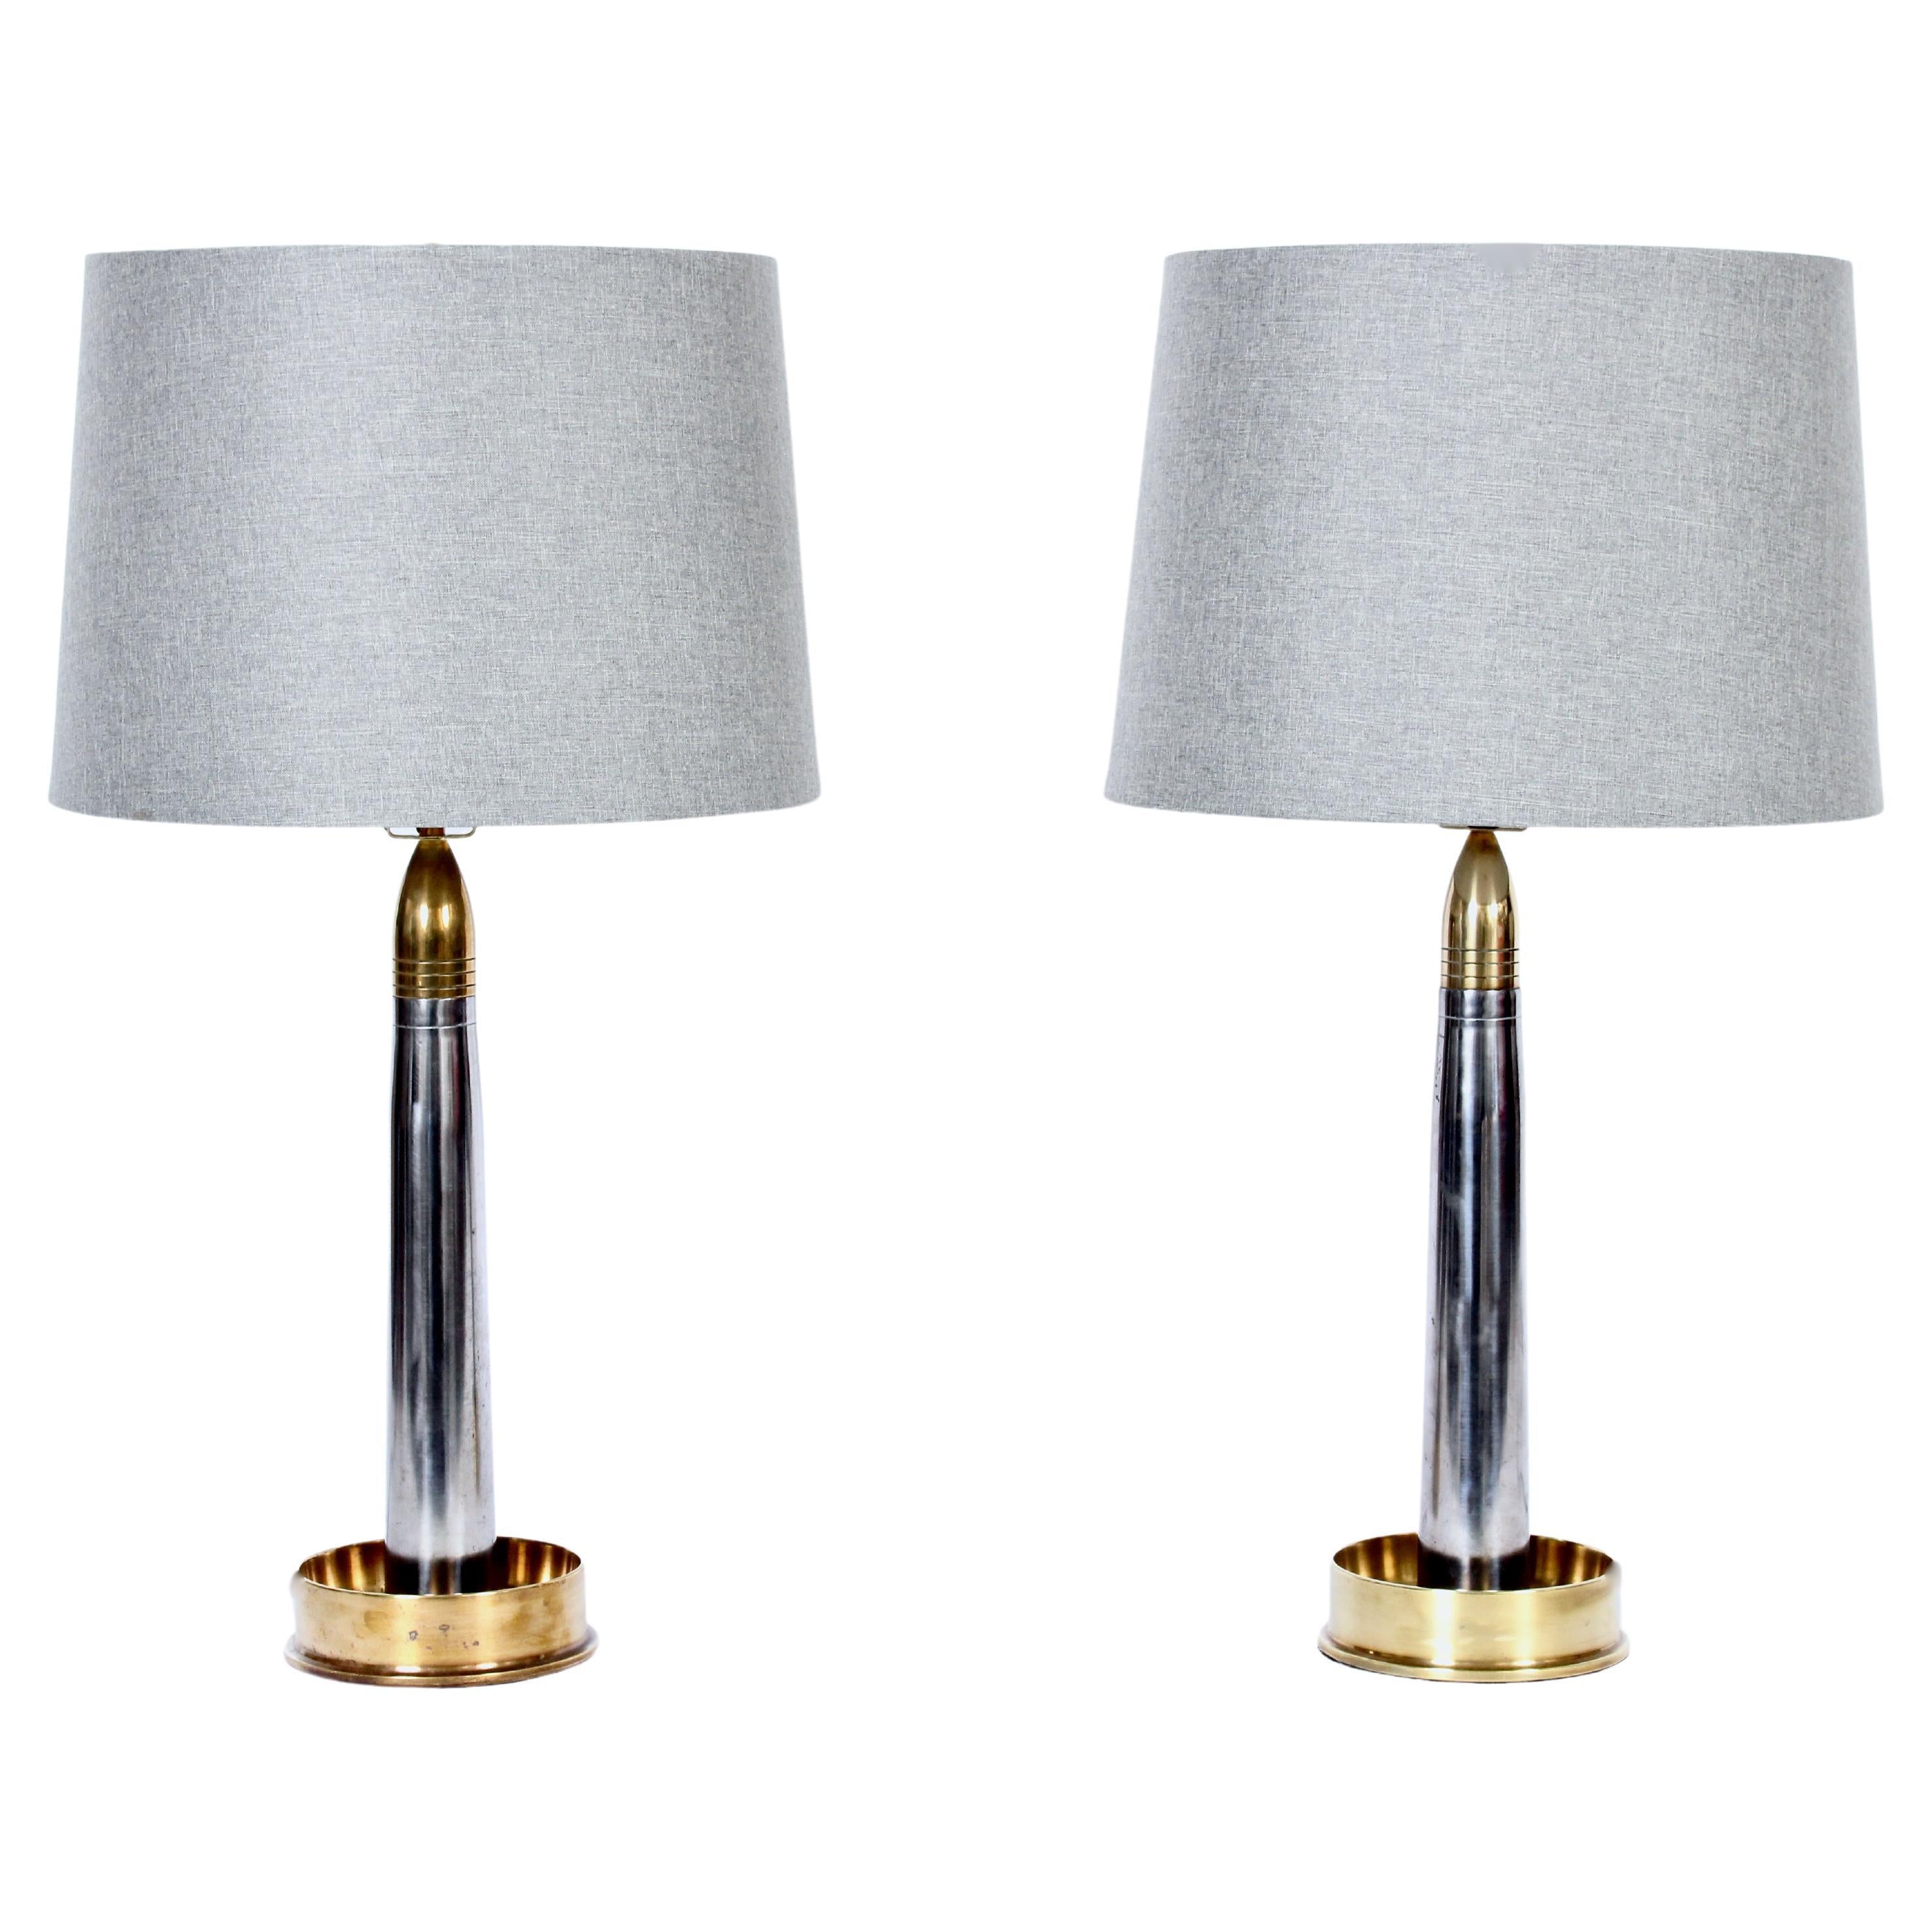 Pair of WWII "Trench Art" Nickel-Plate & Solid Brass Table Lamps, 1940's For Sale